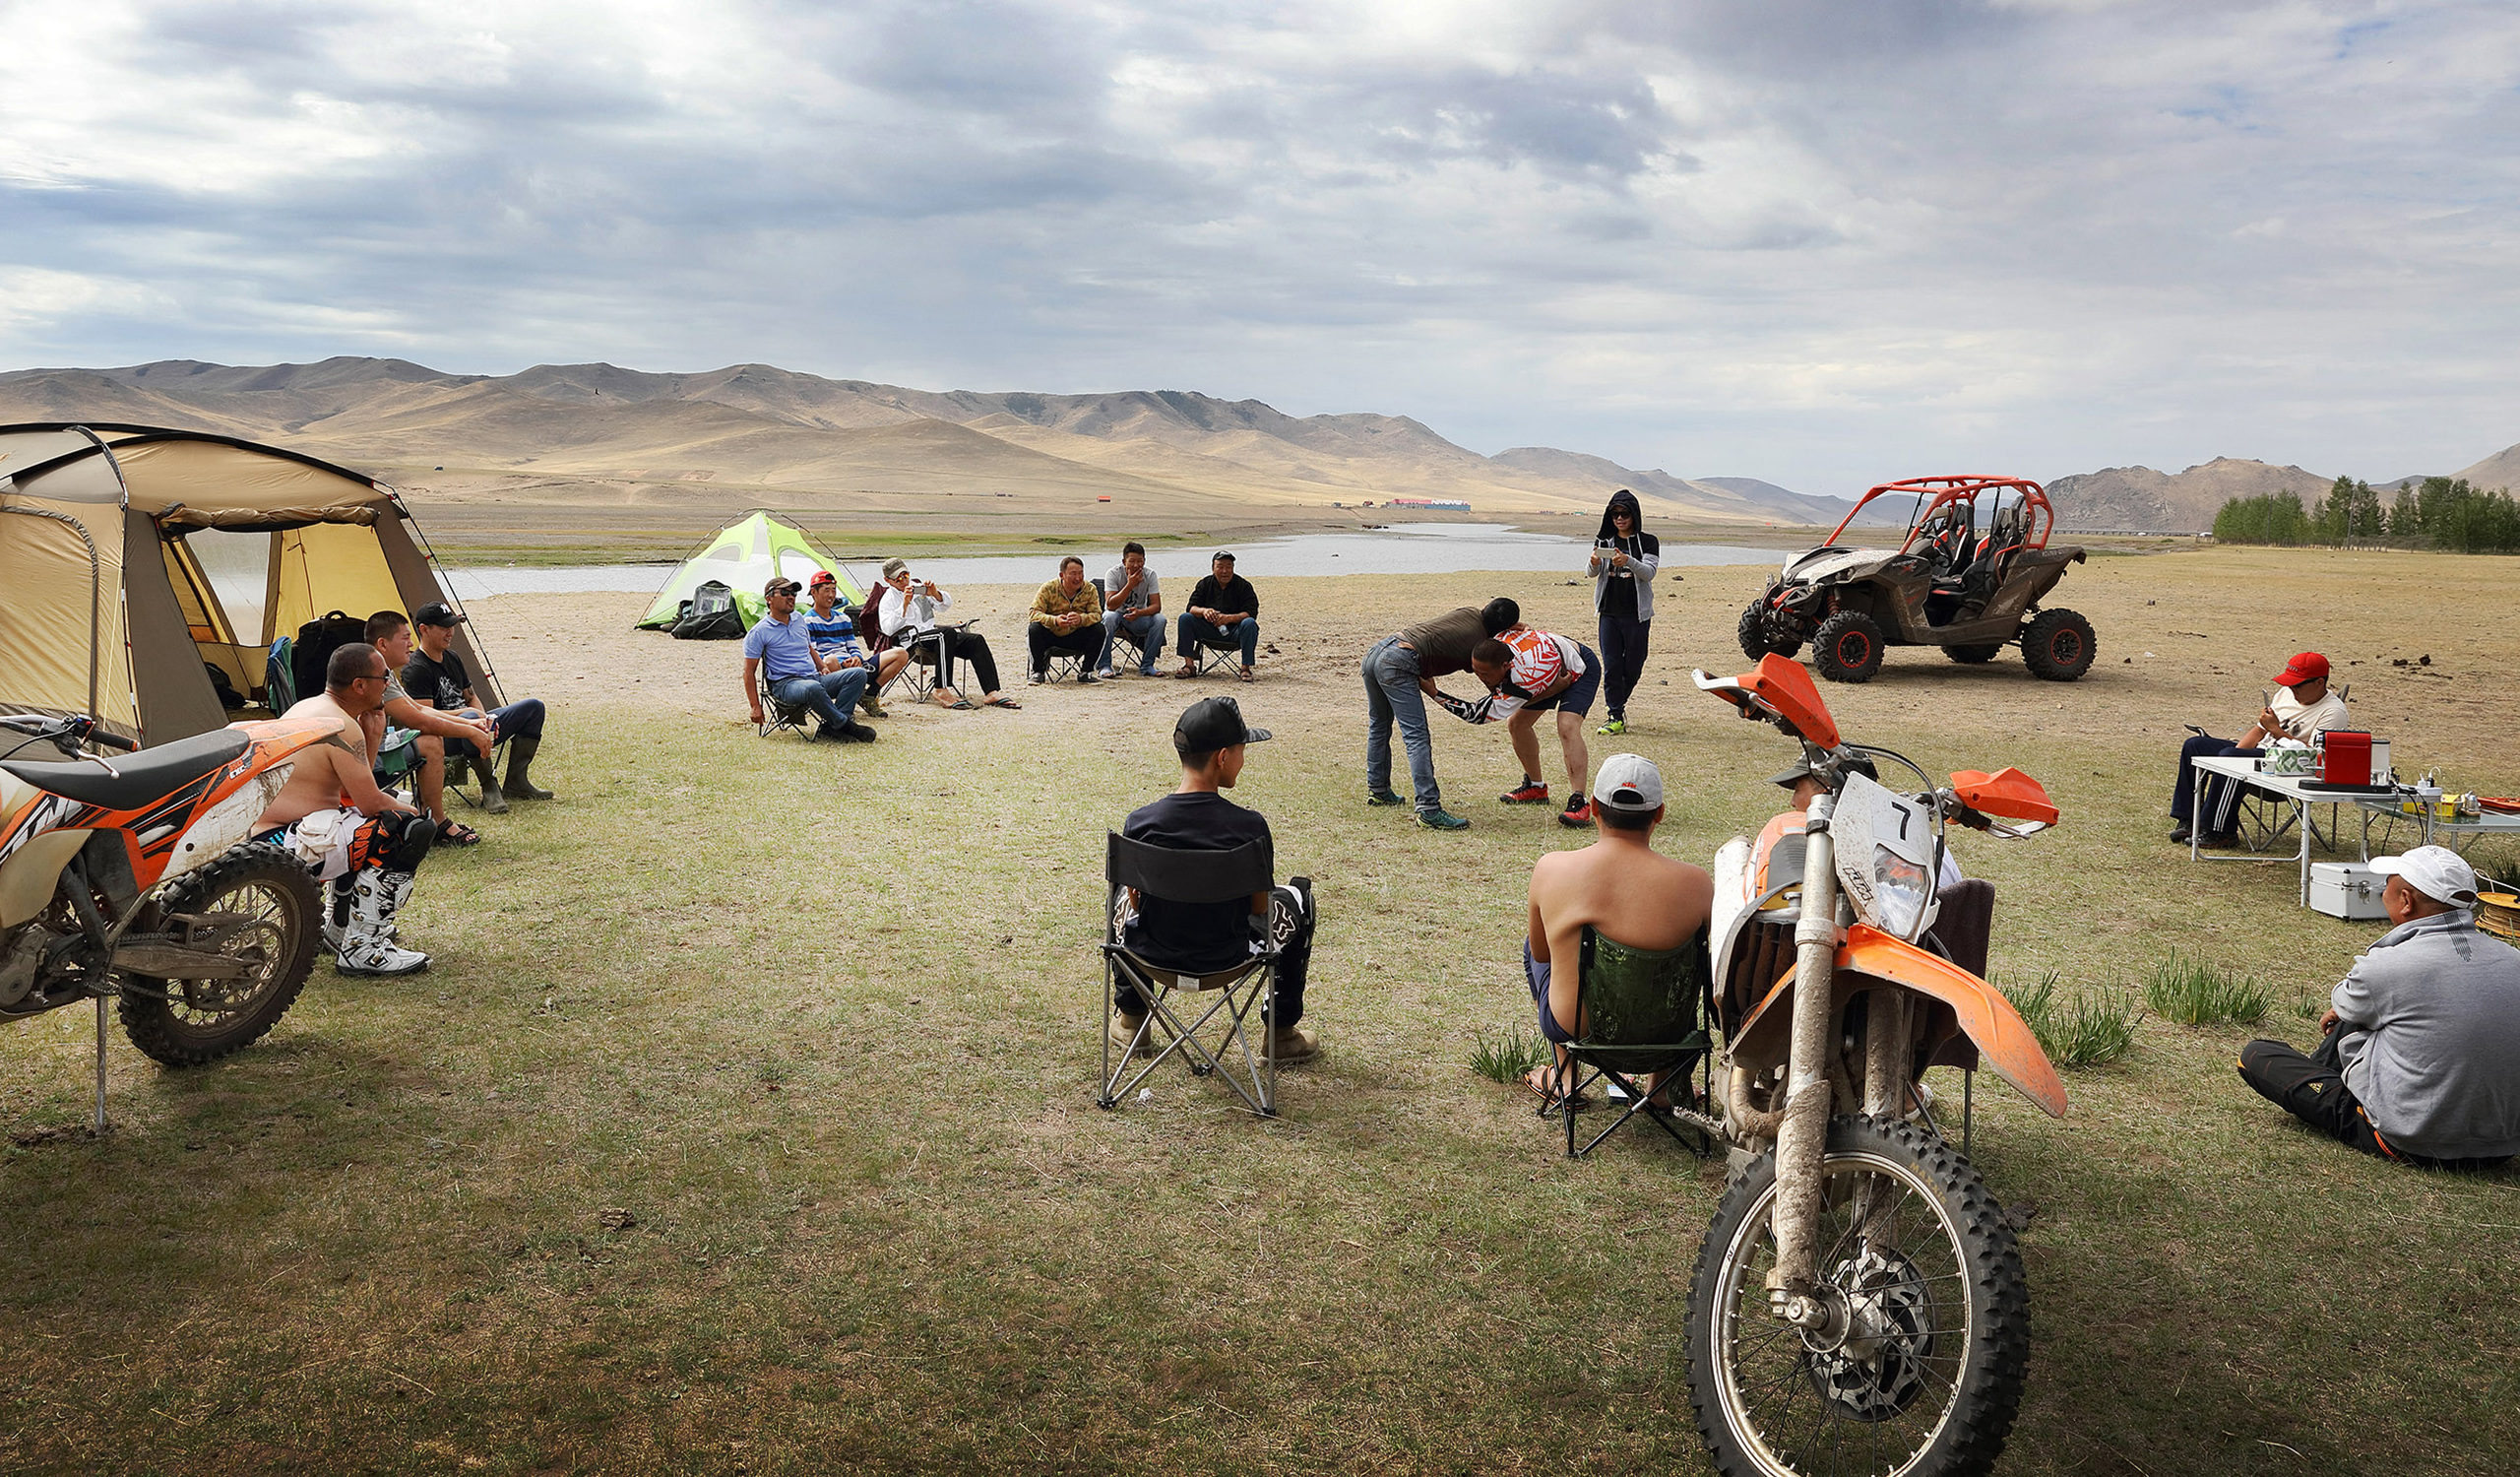 Wrestling is the national sport of Mongolia. A local crew watch on as a couple of friends entertain them.